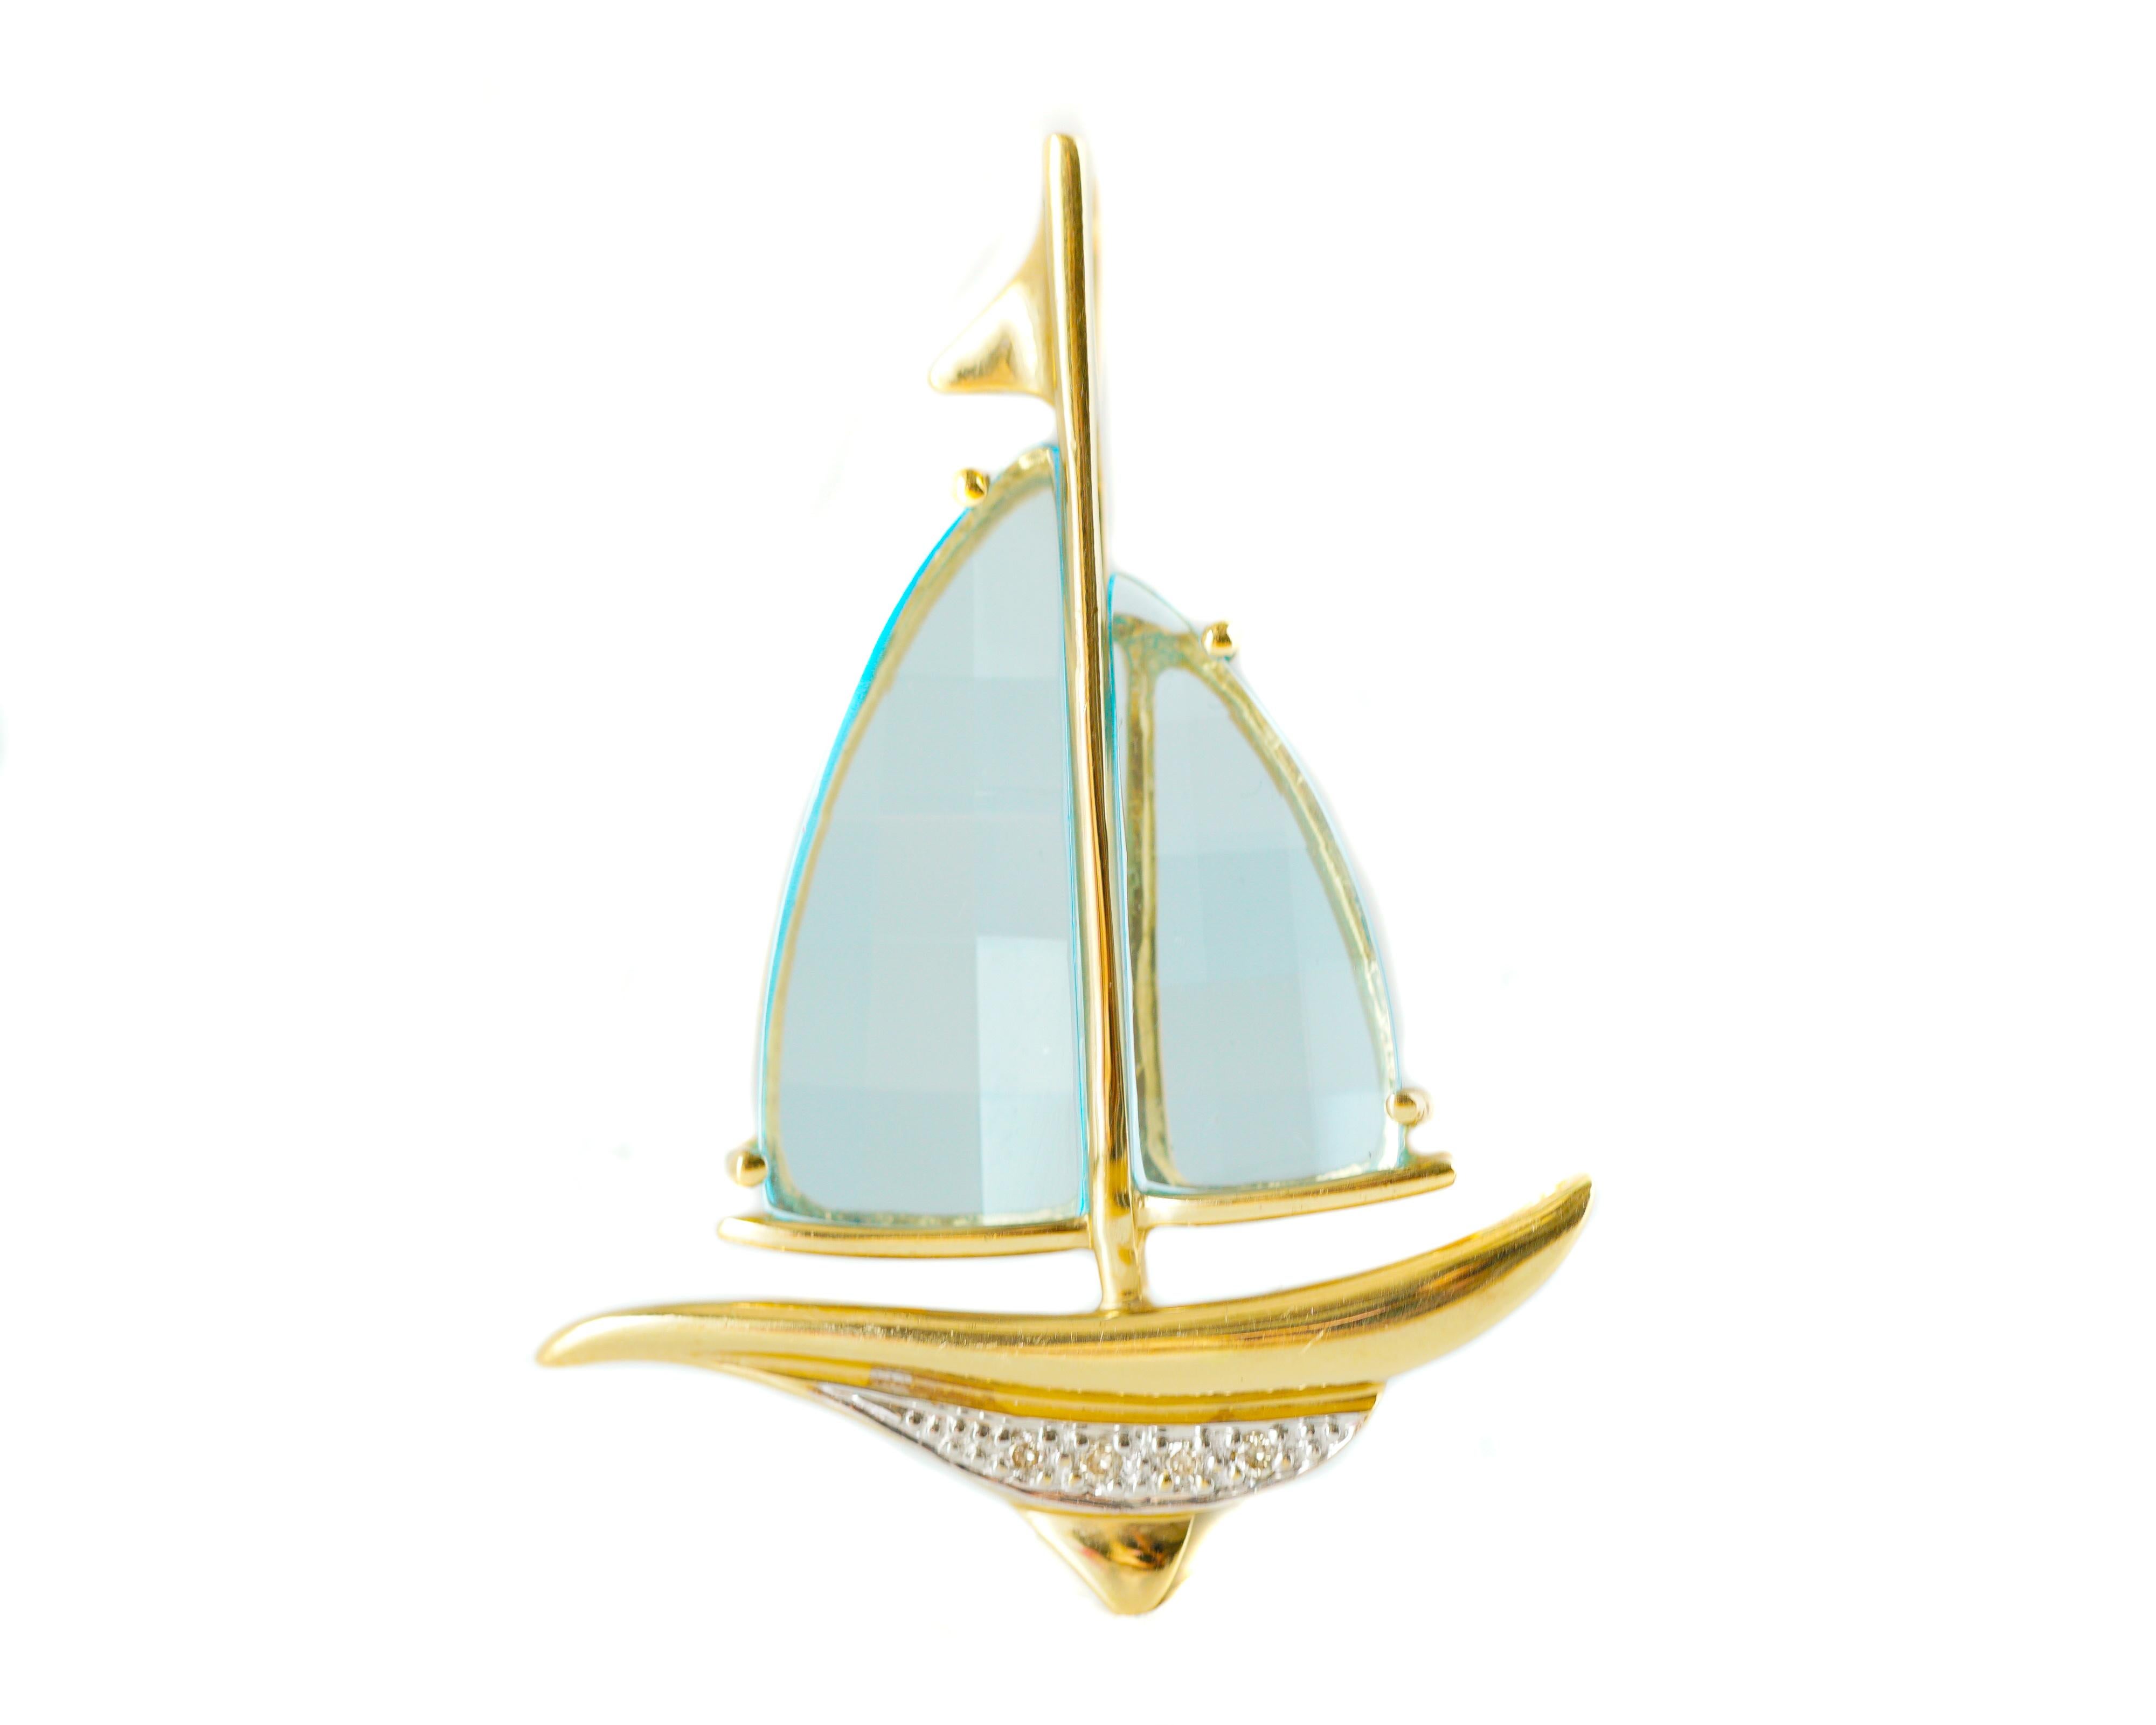 This gorgeous pendant features:
- 7.0 carat total Large, Beautiful, Clear Blue Topaz Mainsail and Jib
- 14 karat yellow Gold Sail Boat with Flag, Mast, Boom, Hull and Keel
- 0.05 carat total Round Brilliant Diamond accented Waterline

Large fixed